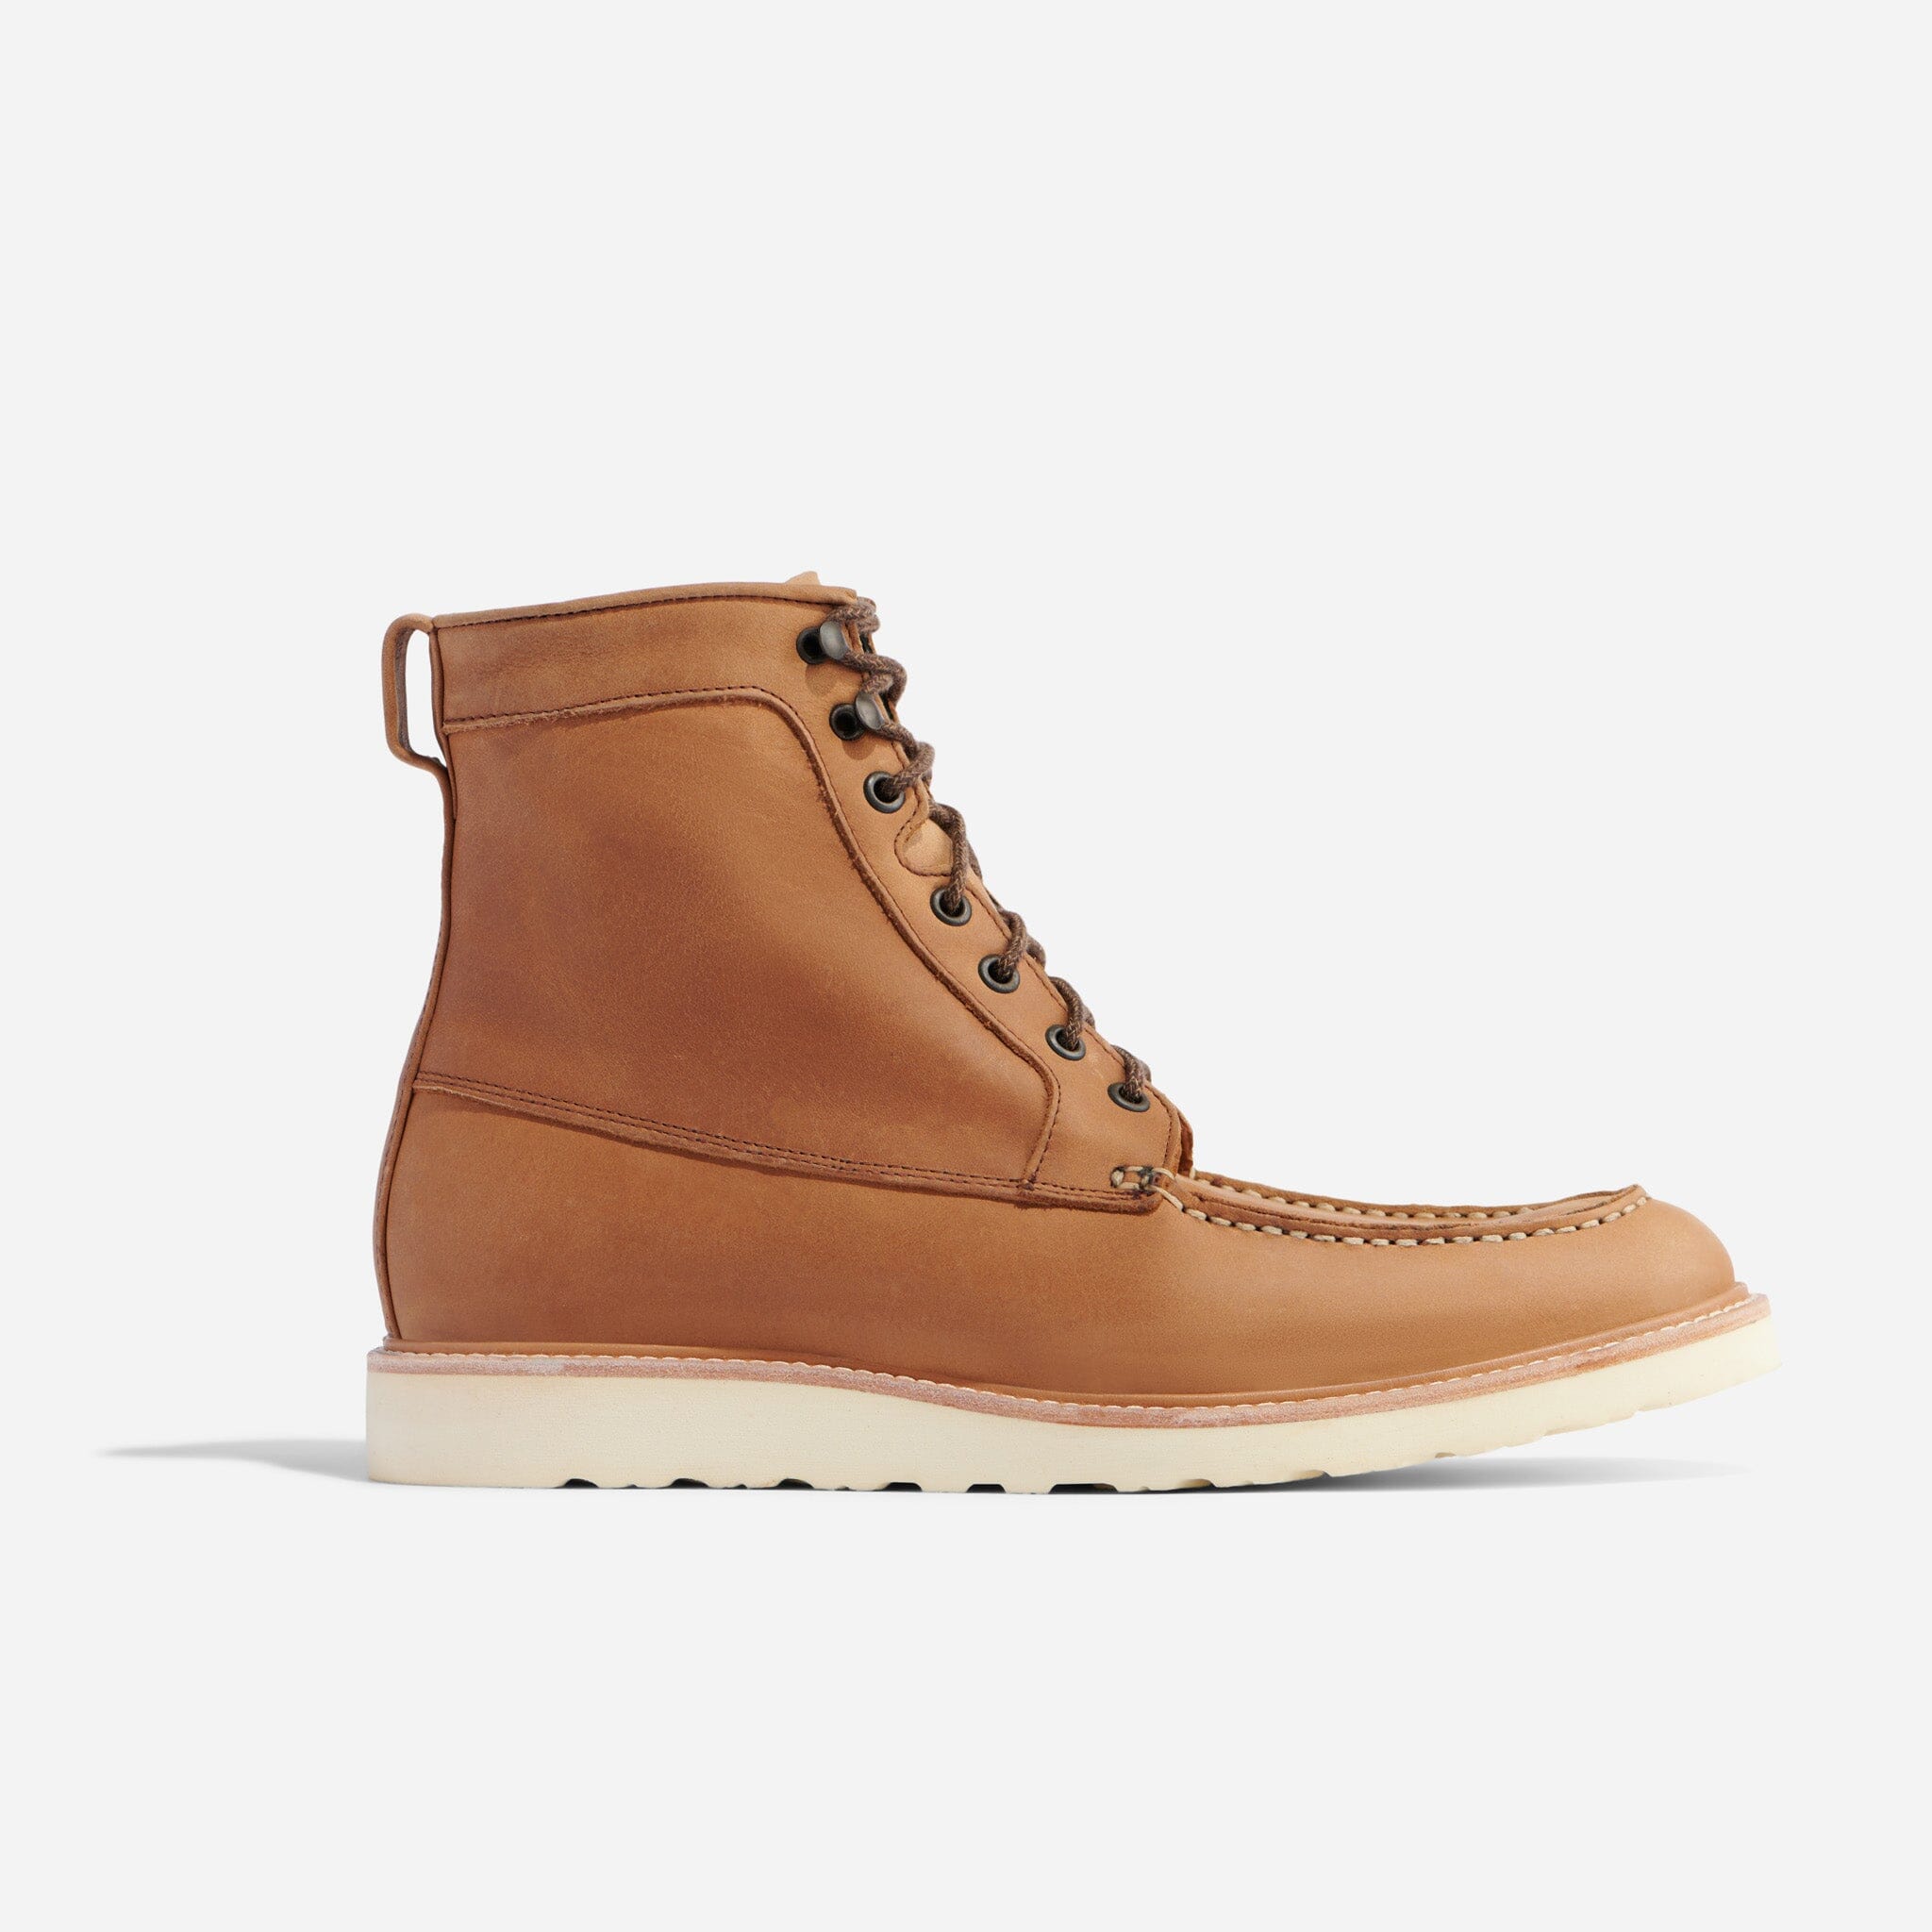 All-Weather Mateo Boot Tobacco Men's Leather Boot Nisolo 